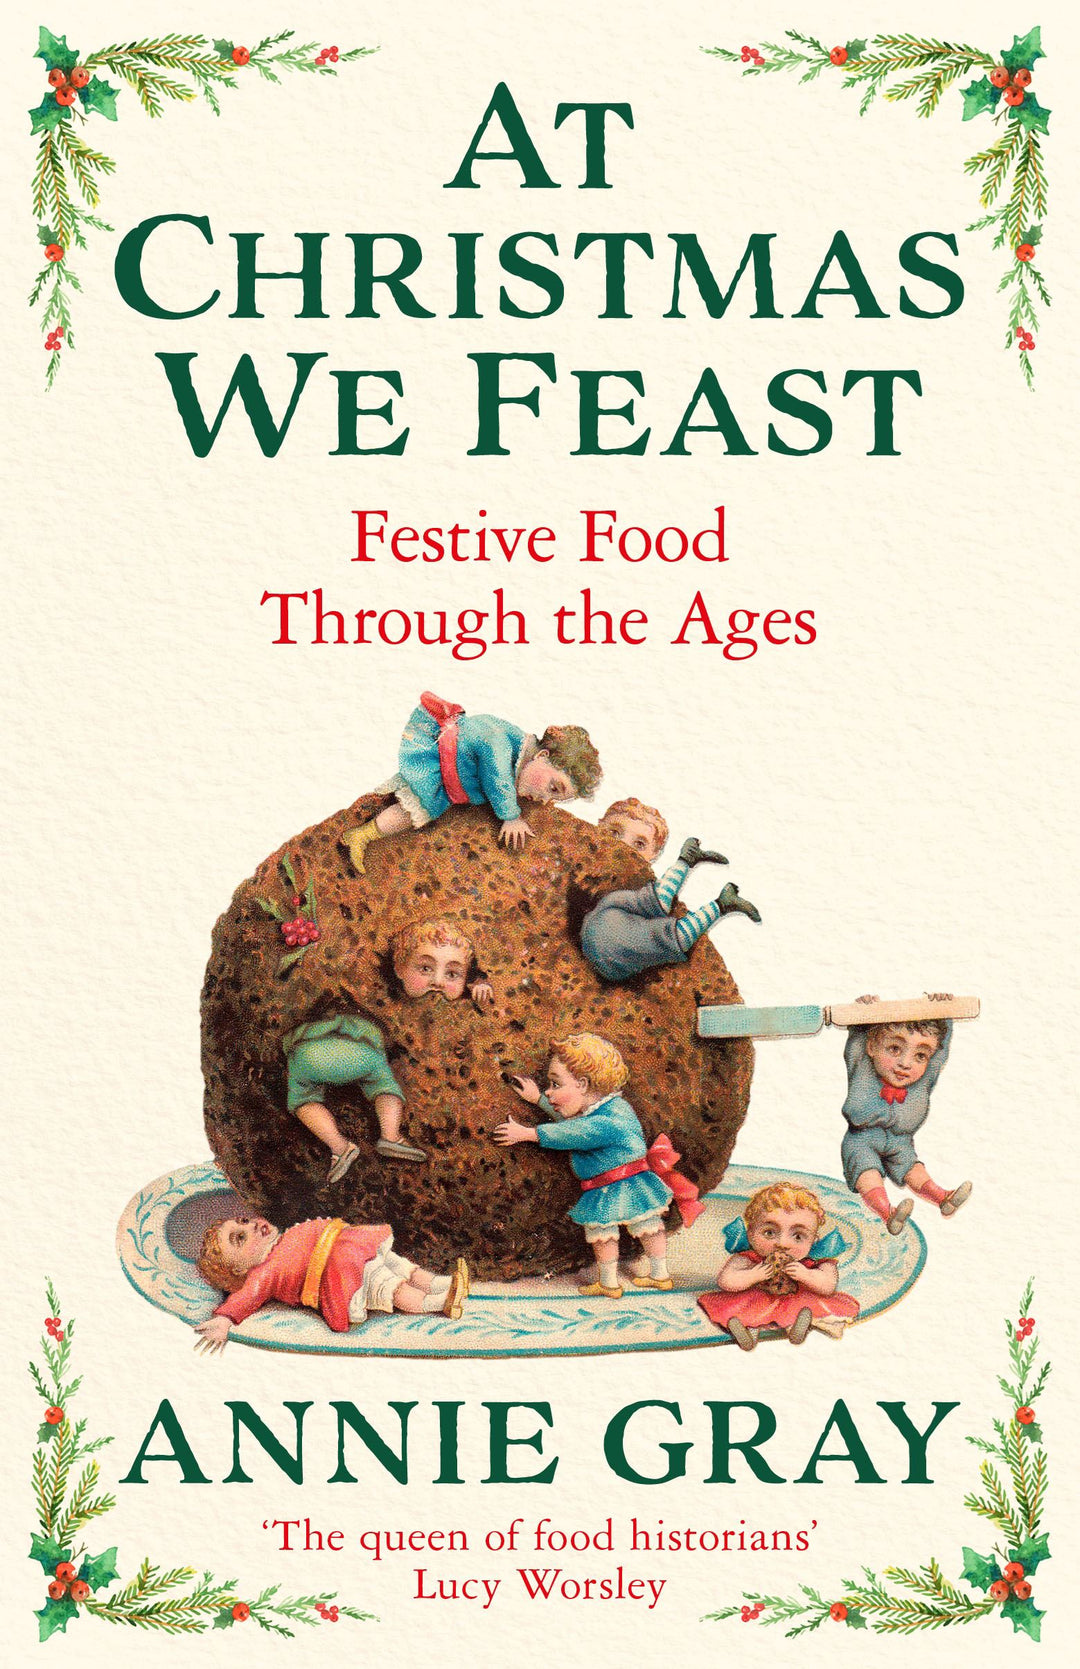 AT CHRISTMAS WE FEAST:FESTIVE FOOD THROUGH THE AGES BOOK